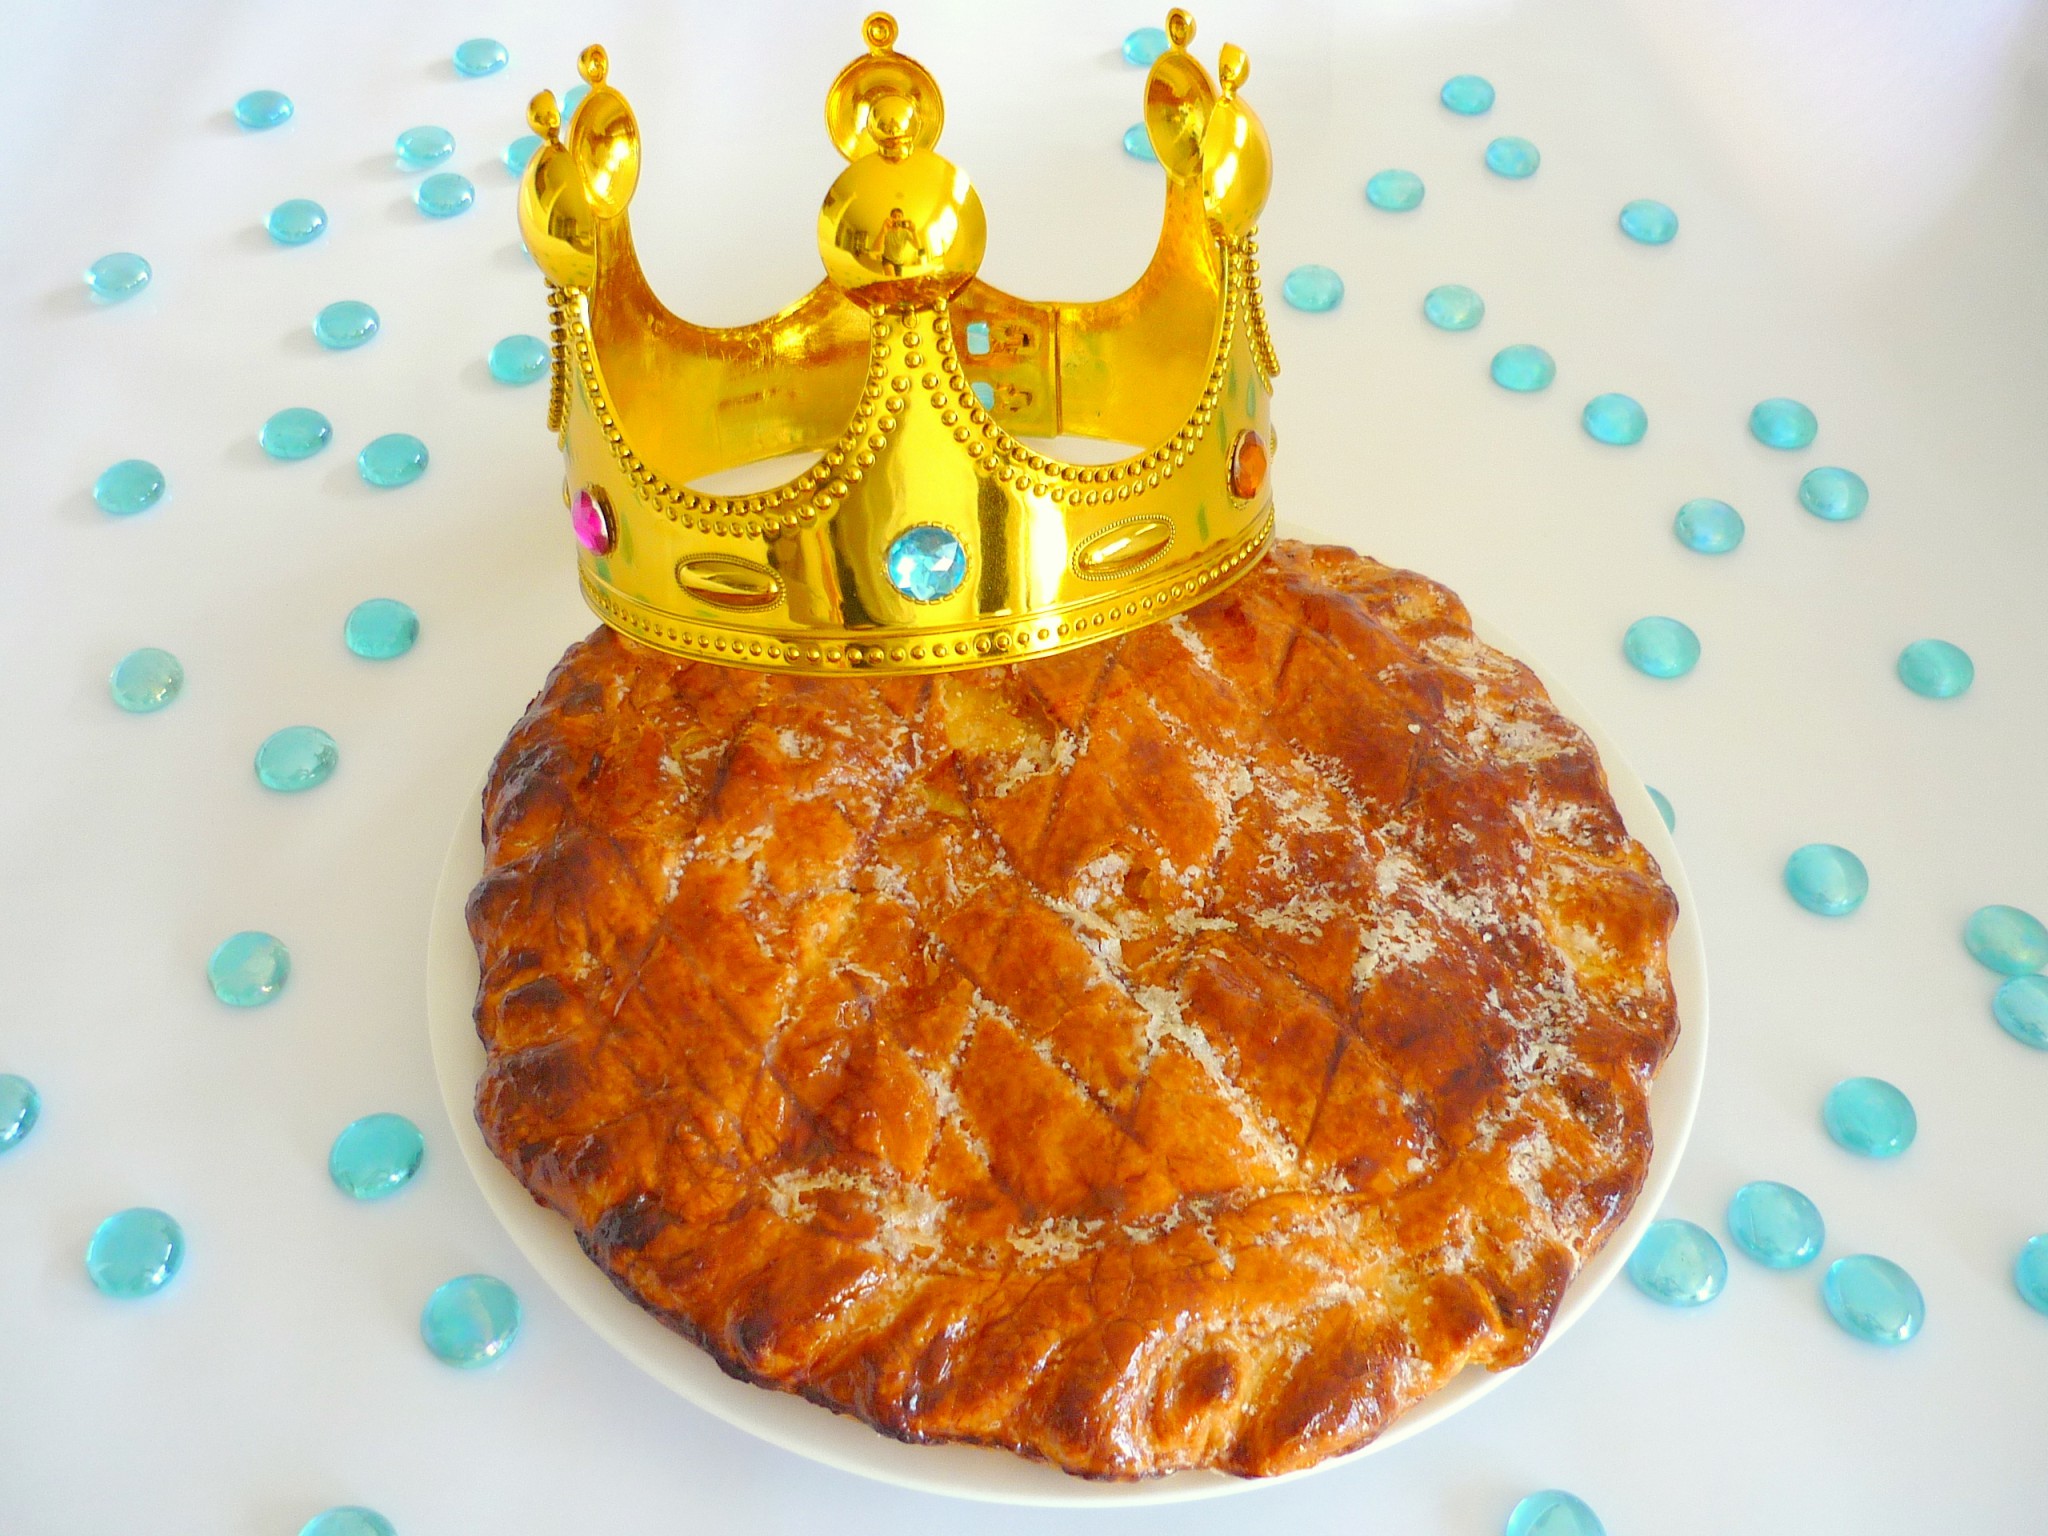 FEVE GALETTE ROIS COURONNE SUPPORT